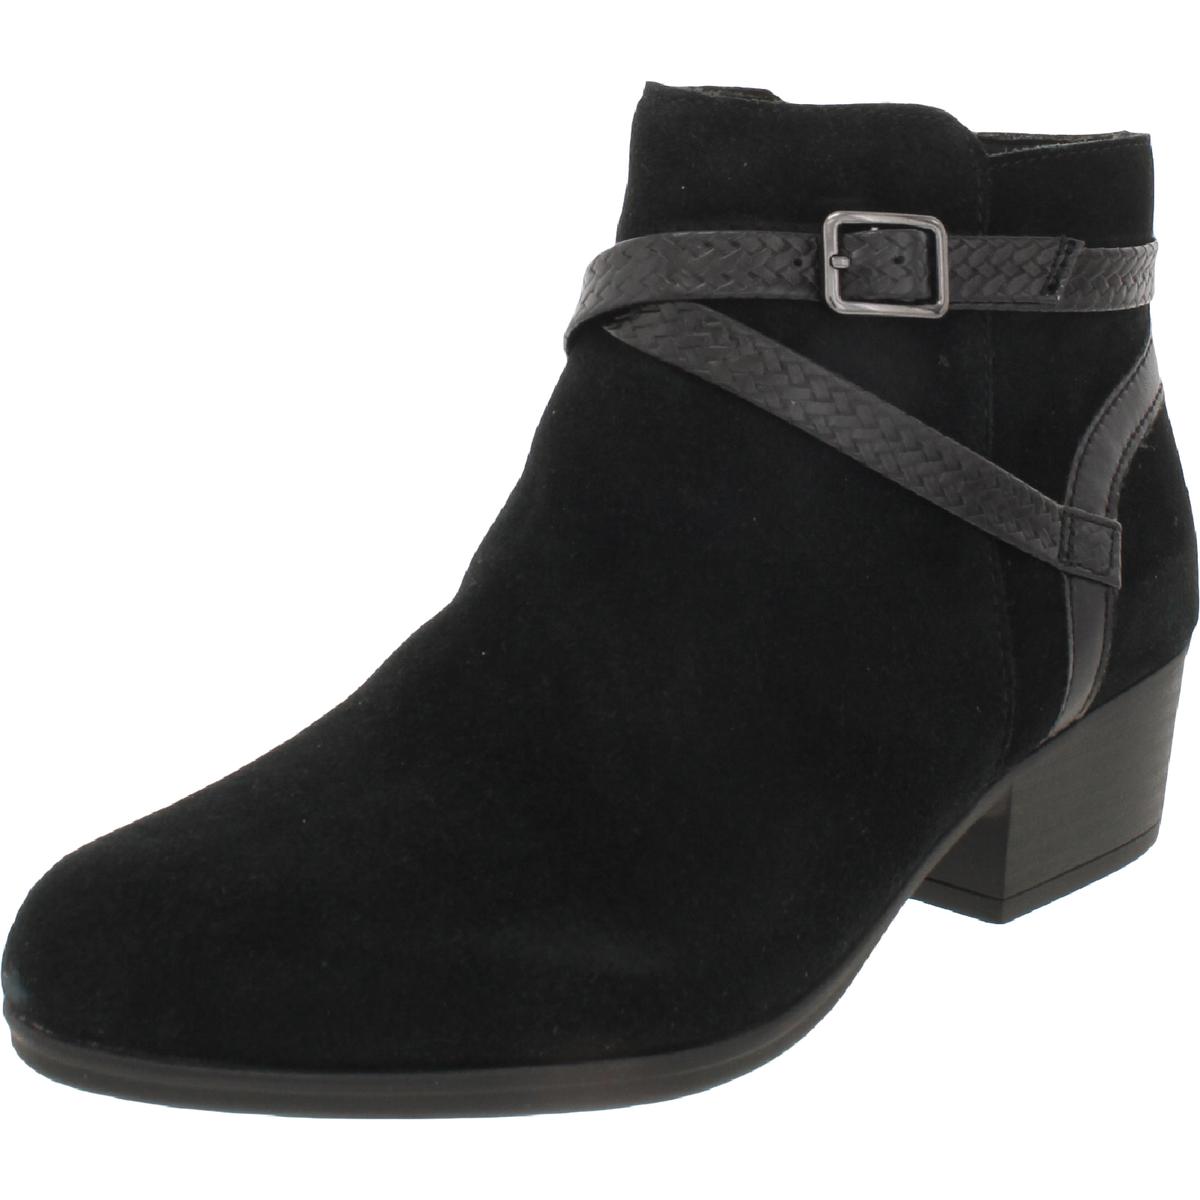 Clarks Adreena Hi Womens Suede Round Toe Ankle Boots